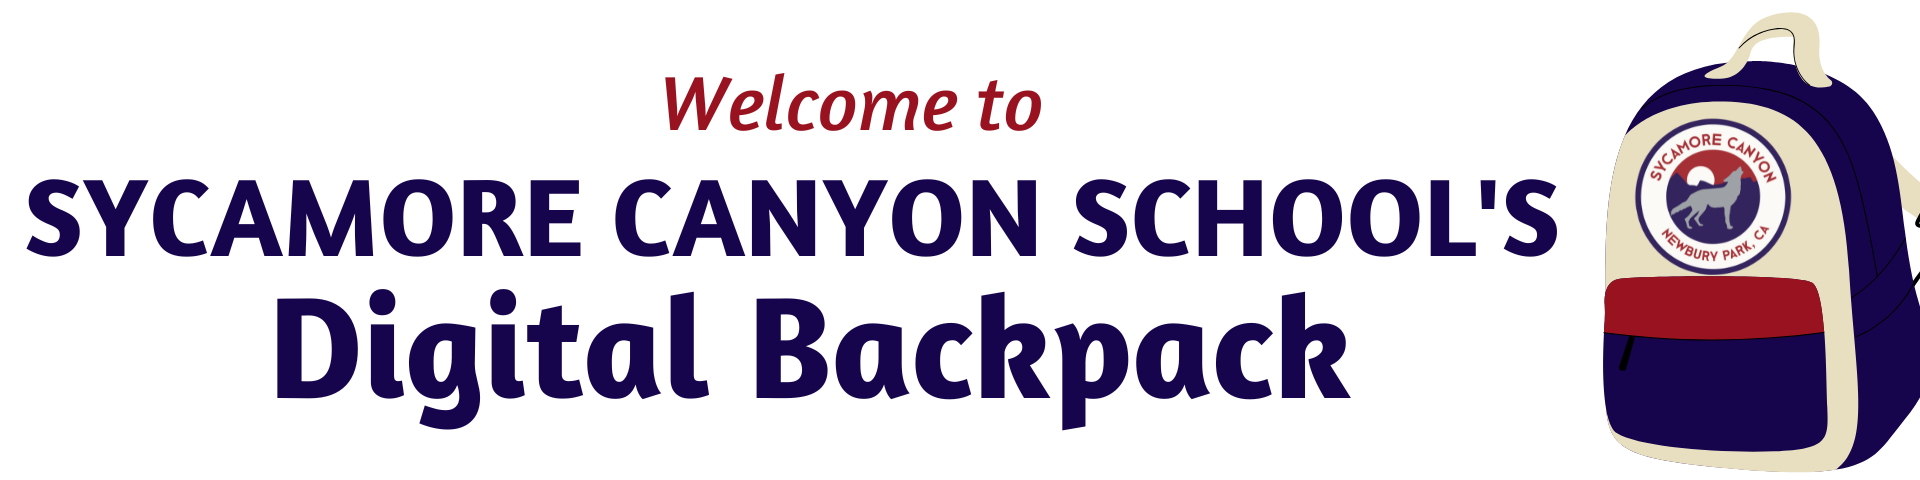 Welcome to Sycamore Canyon School's Digital Backpack